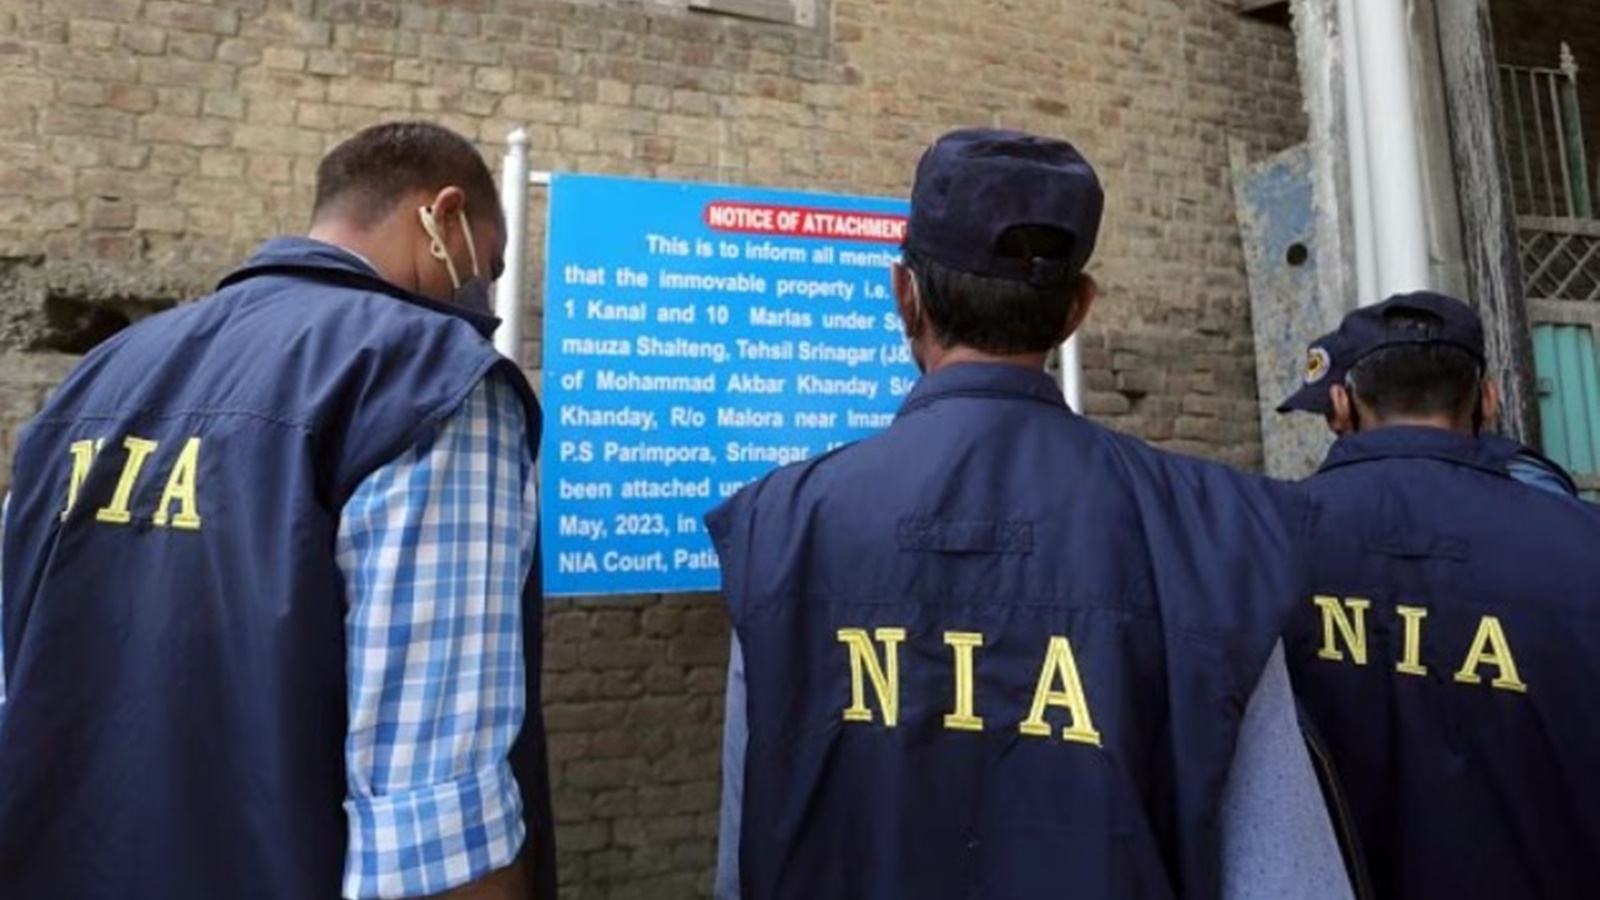 West Bengal Police summons two NIA officers in Bhupatinagar attack case